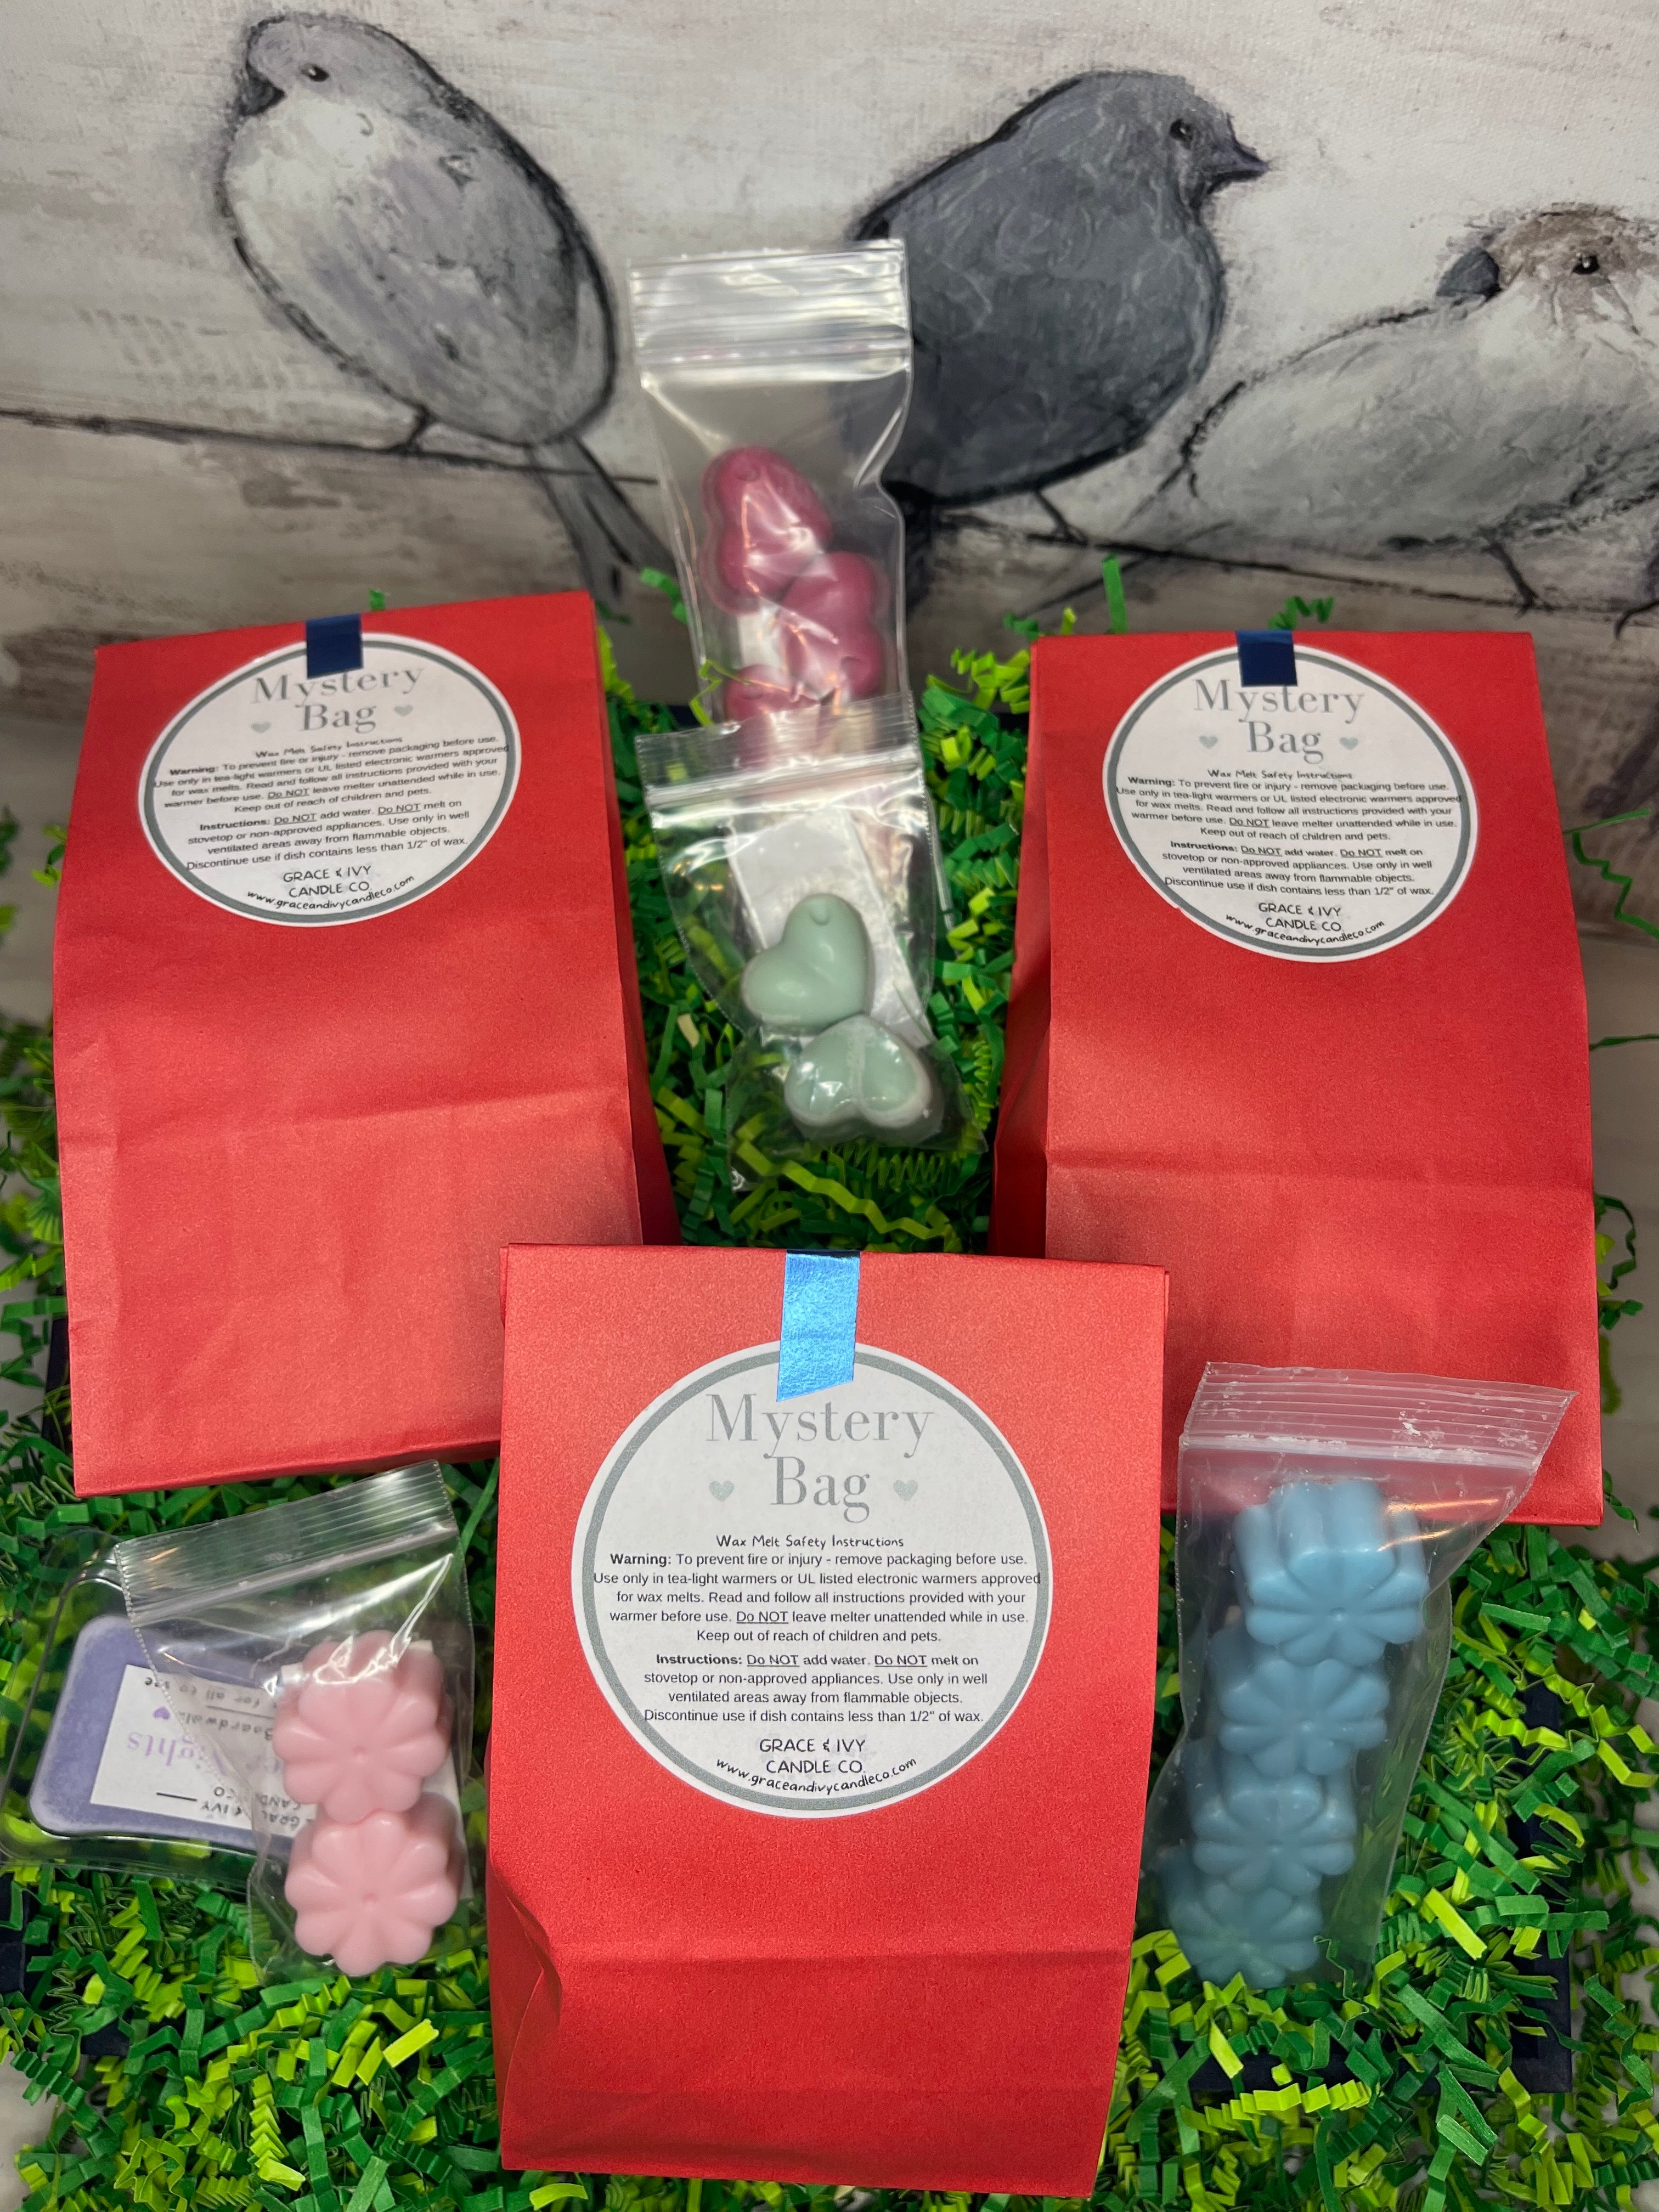 Mystery Bag of wax melts